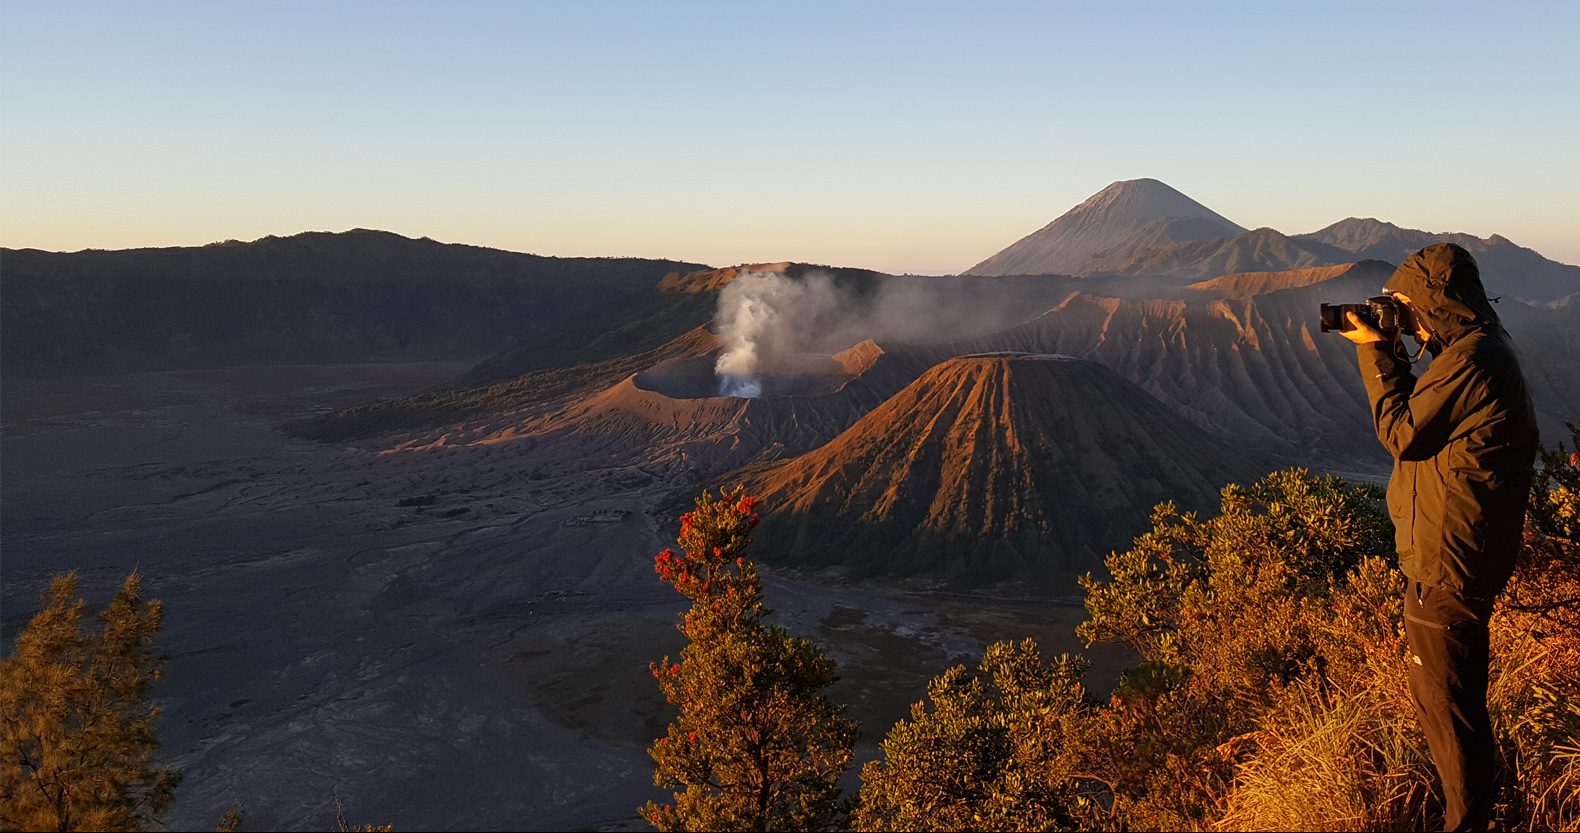 The Bromo Volcano without a tour: how to do it yourself